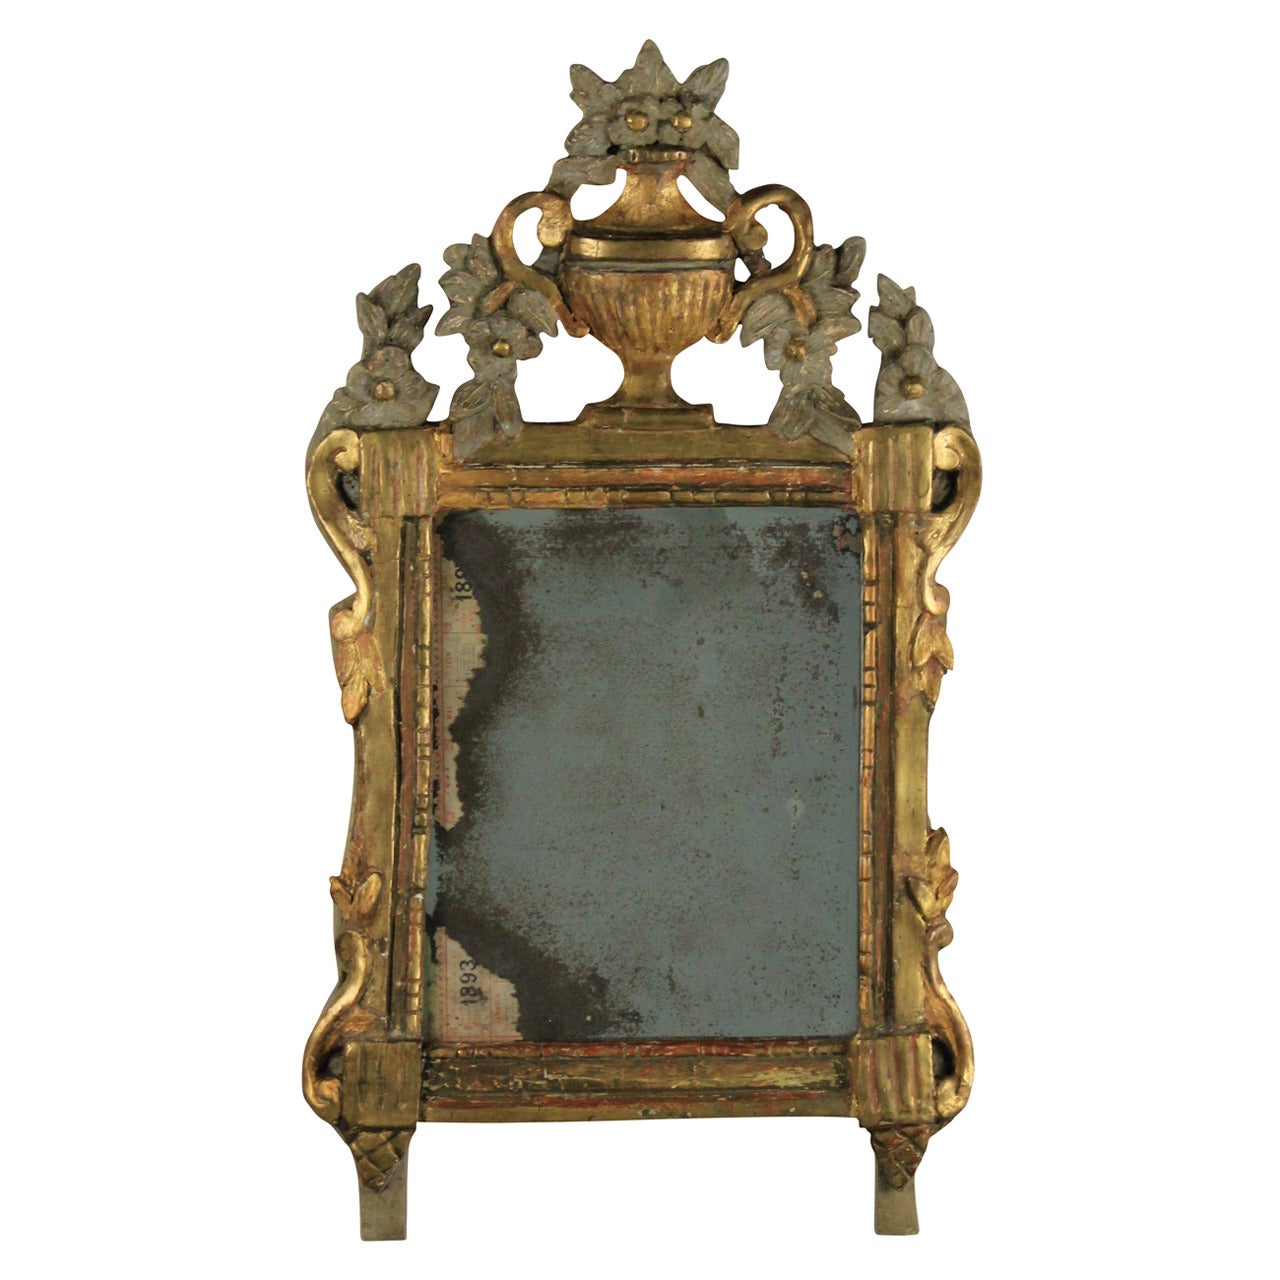 A charming little French Provincial mirror with a water gilded and painted frame with a floral cartouche. Original mercury plate.